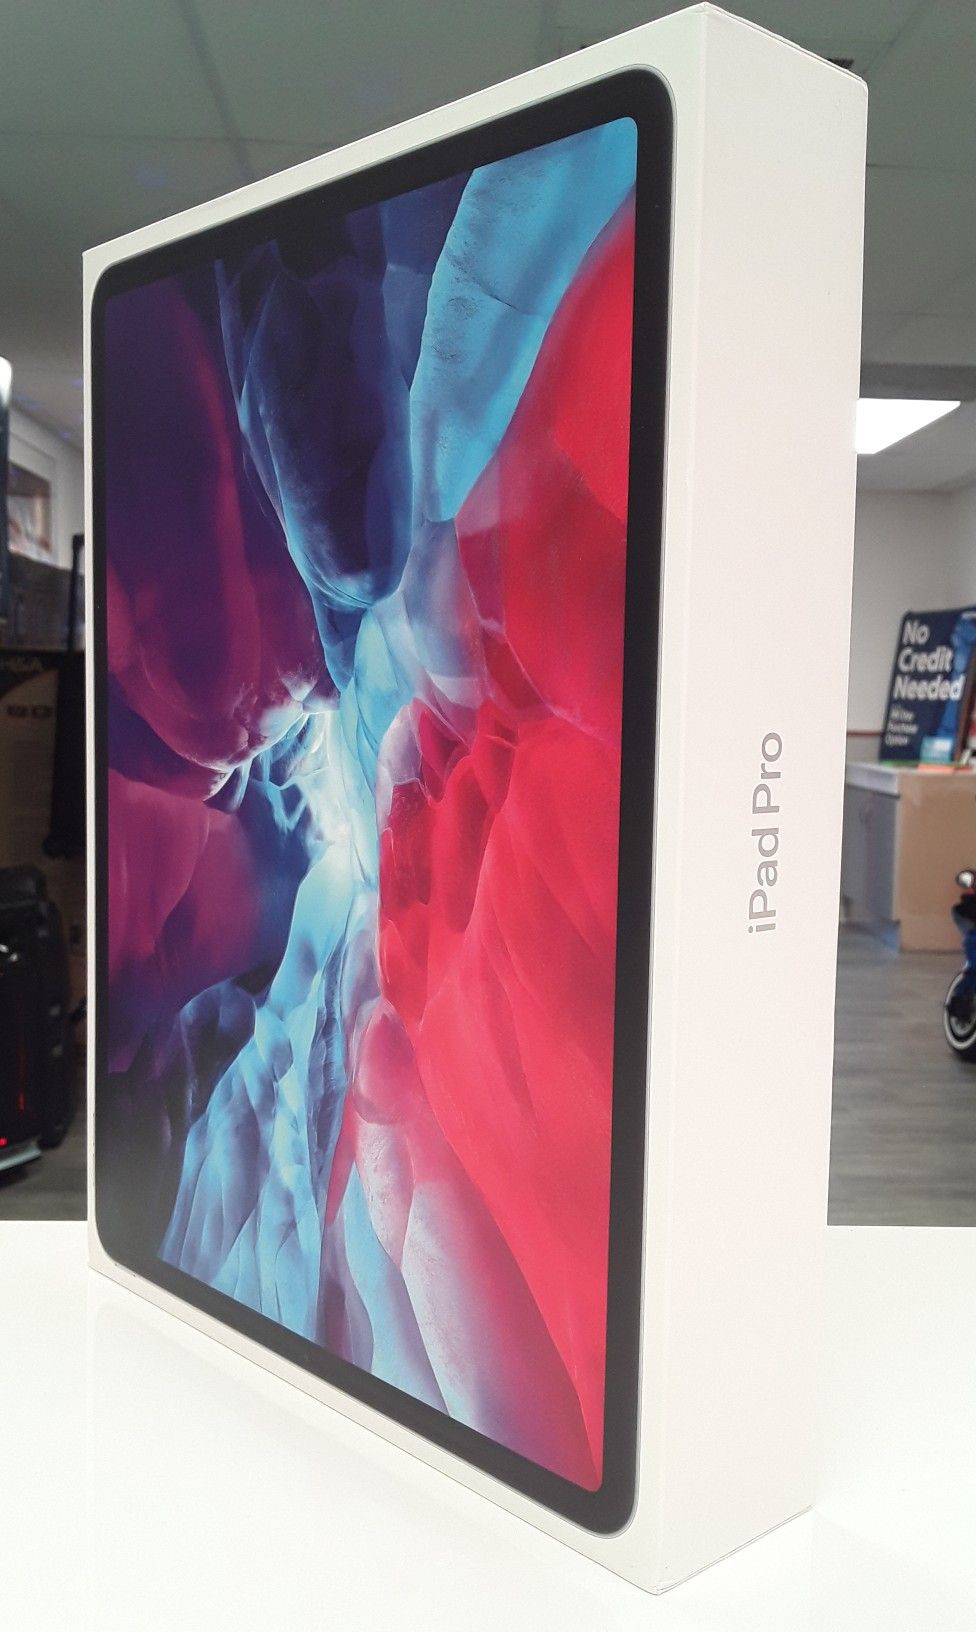 iPad Pro 12.9 inch on special for $899 today only [ we finance $50 down payment no credit needed